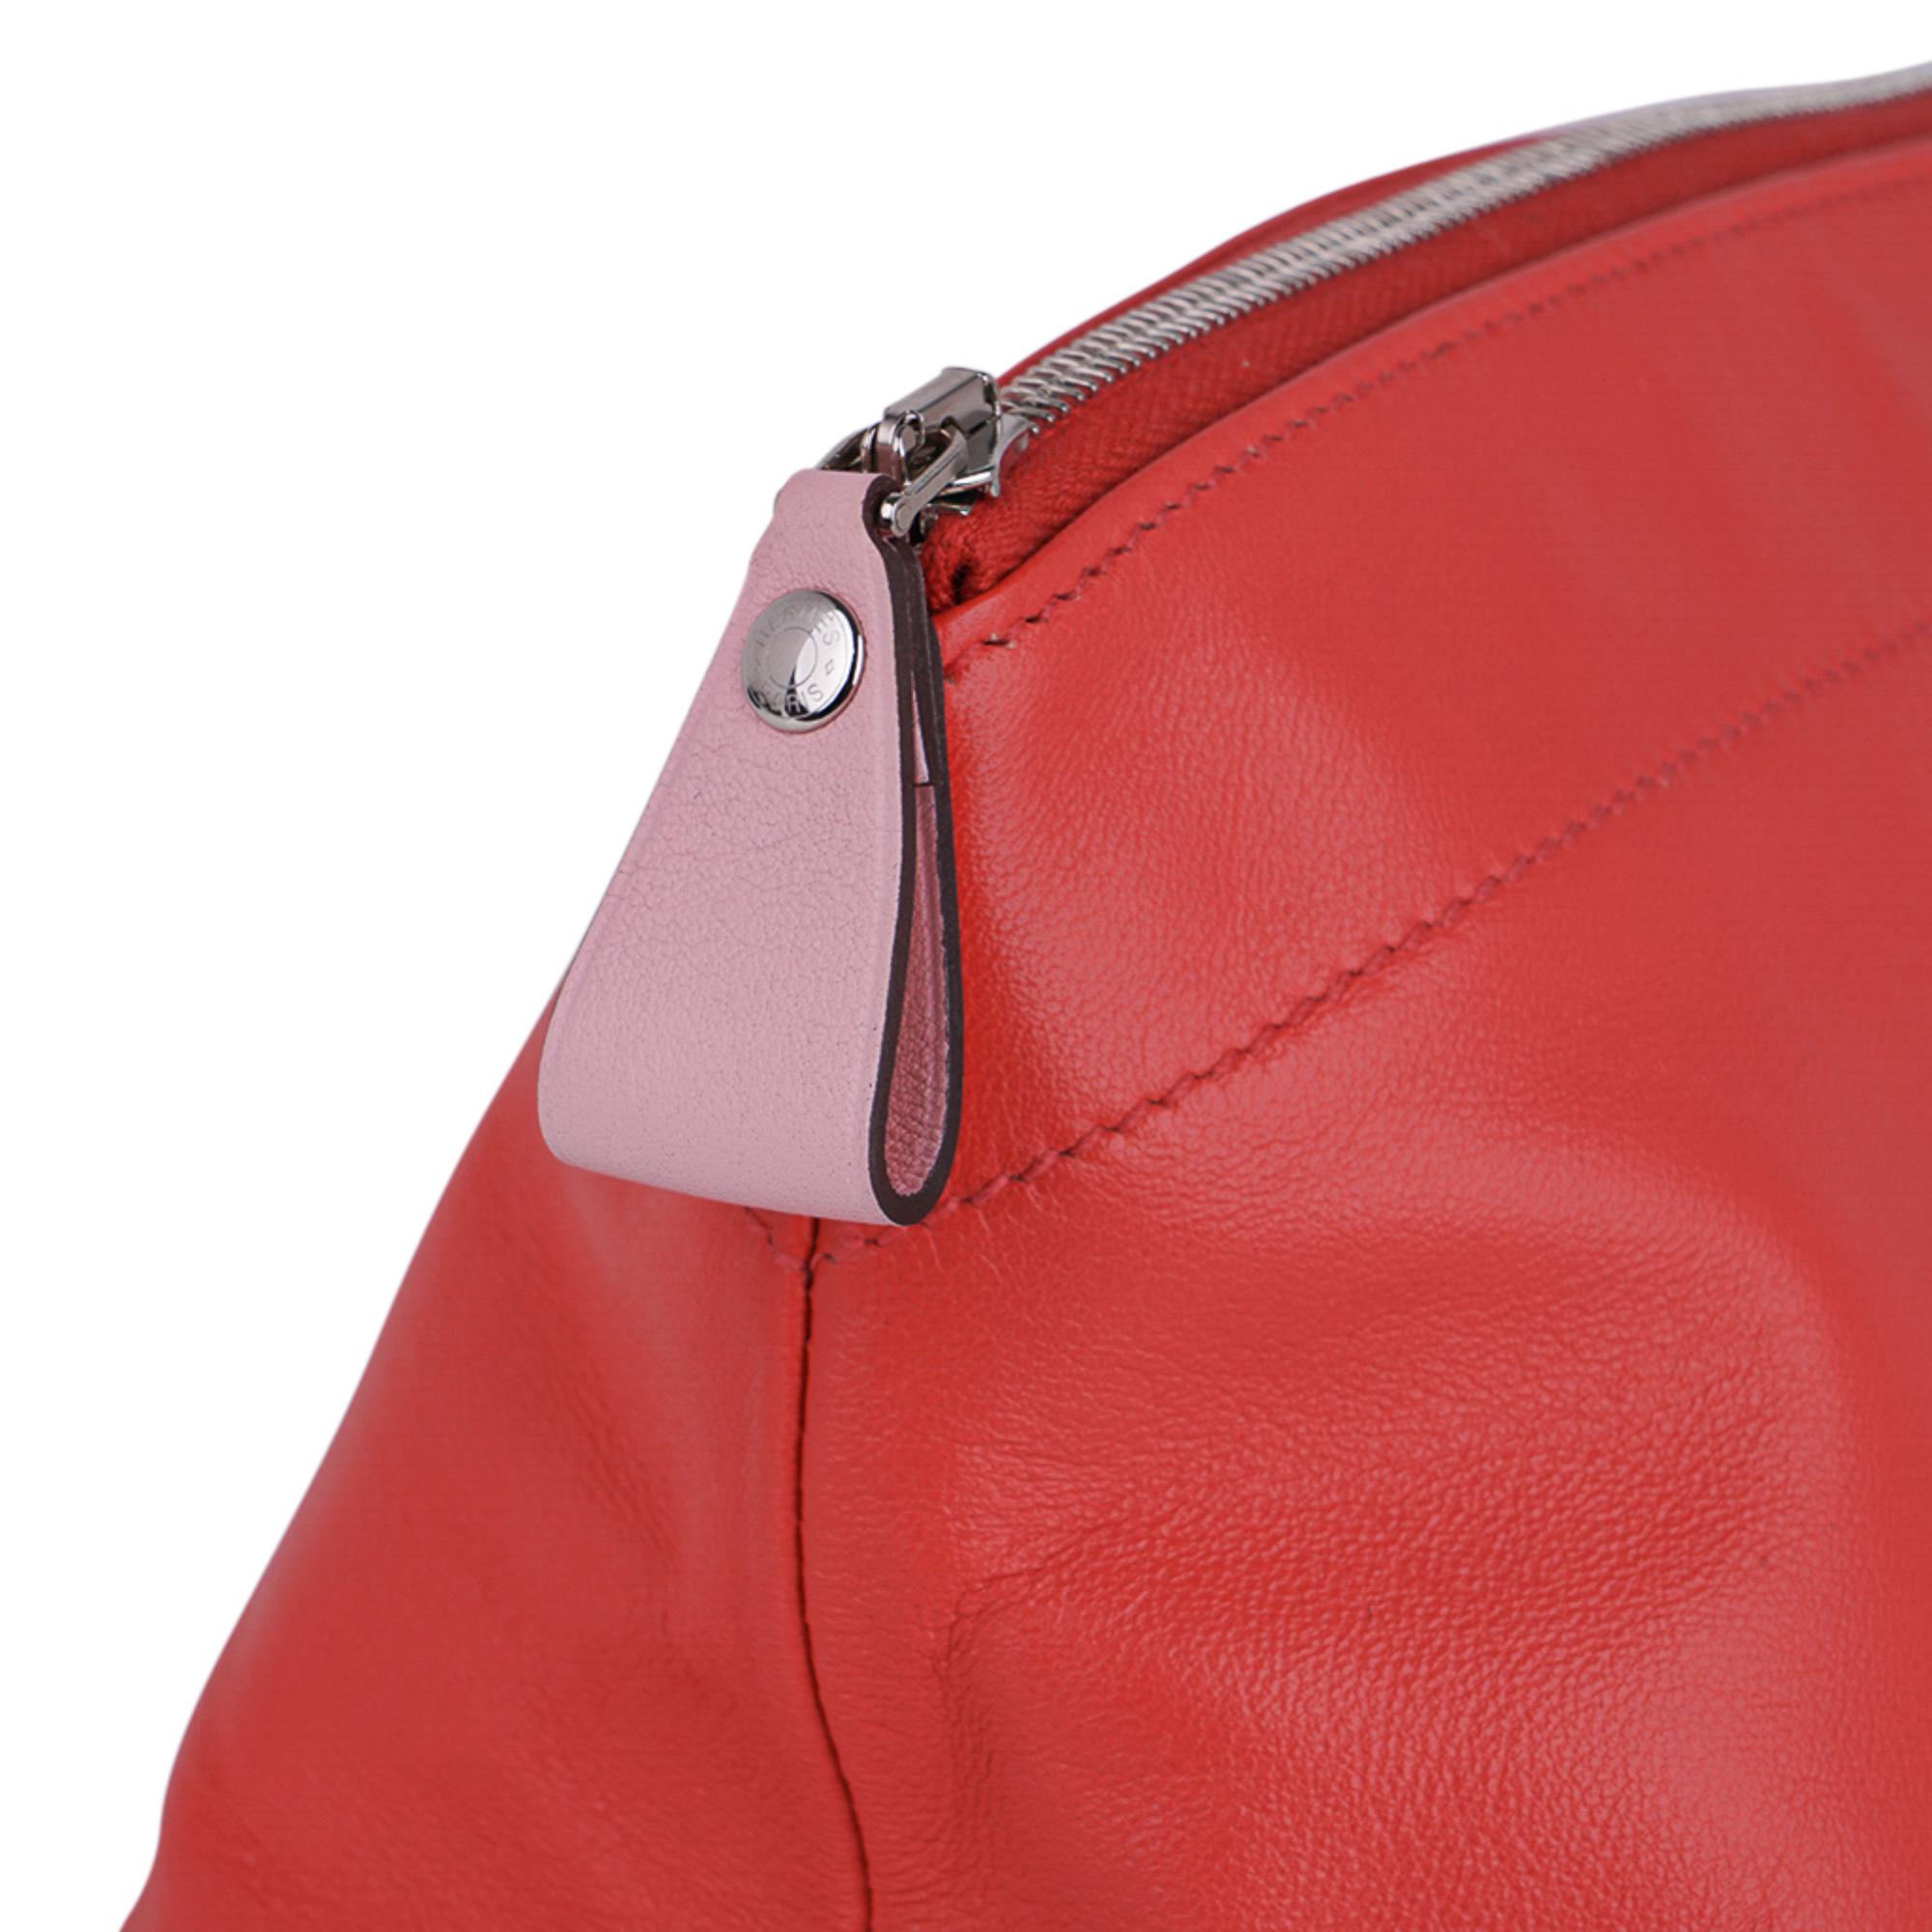 Mightychic offers an Hermes Tohubohu Pouch Large Model featured in Rose Jaipur and Rose Sakura.
A multifunctional piece in butter soft Milo Lambskin.
Top zip has Prune leather pull.
Tone on tone stitch.
Interior is Prune leather and Toile.
Palladium